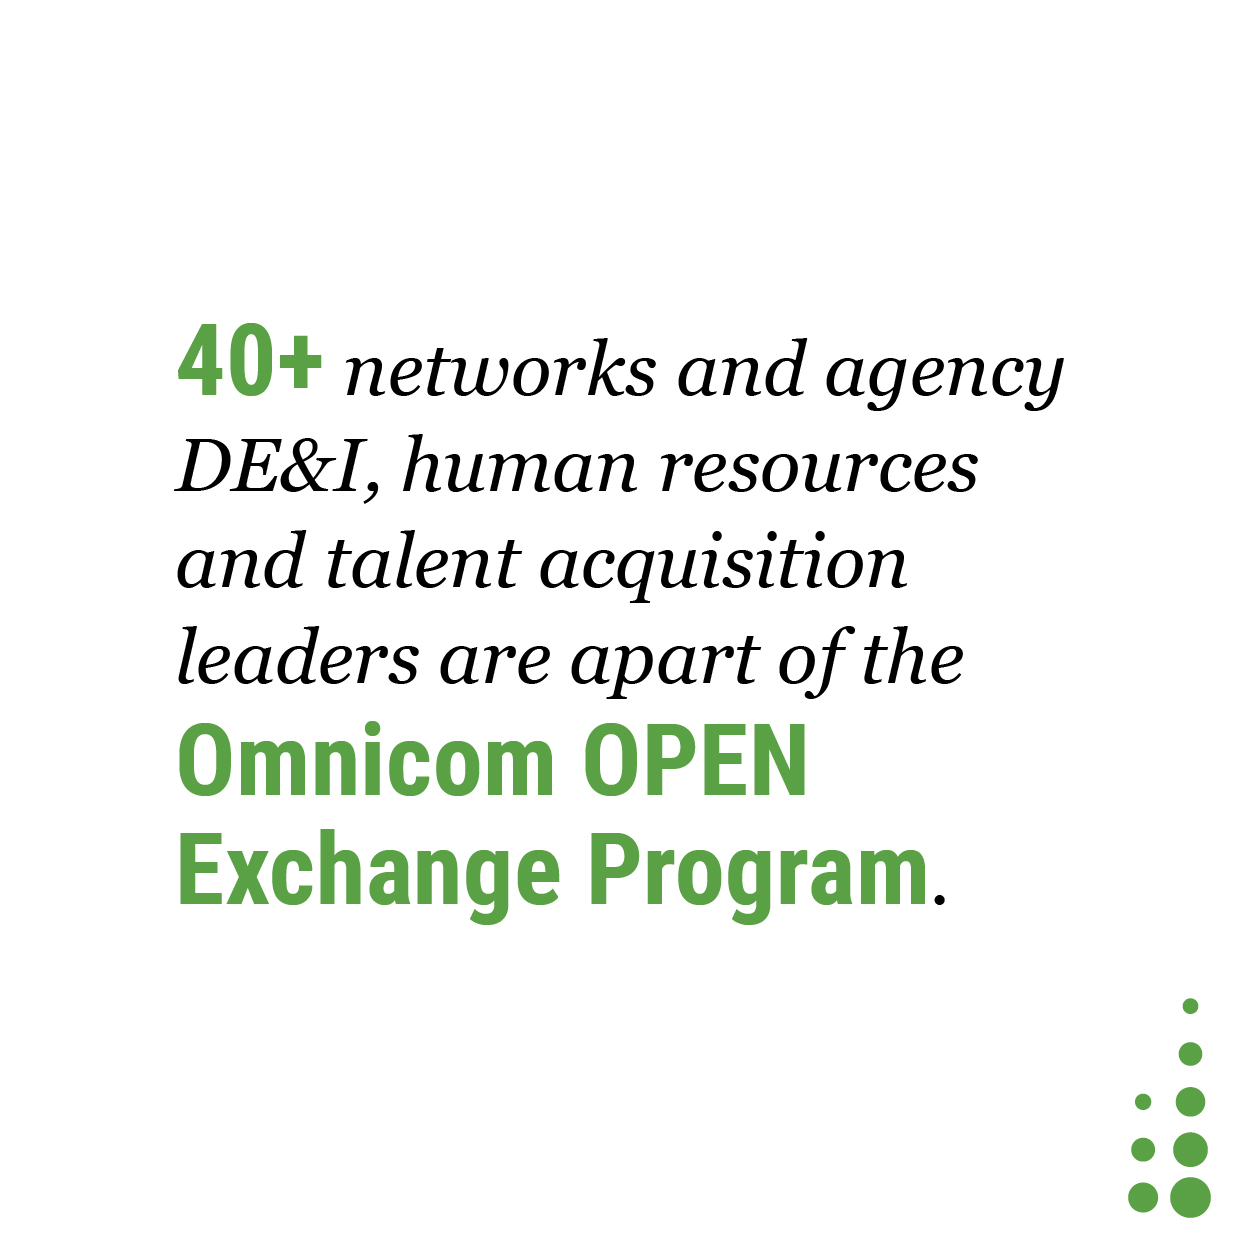 40+ networks and agency DE&I, human resources and talent acquisition leaders are apart of the Omnicom OPEN Exchange Program.